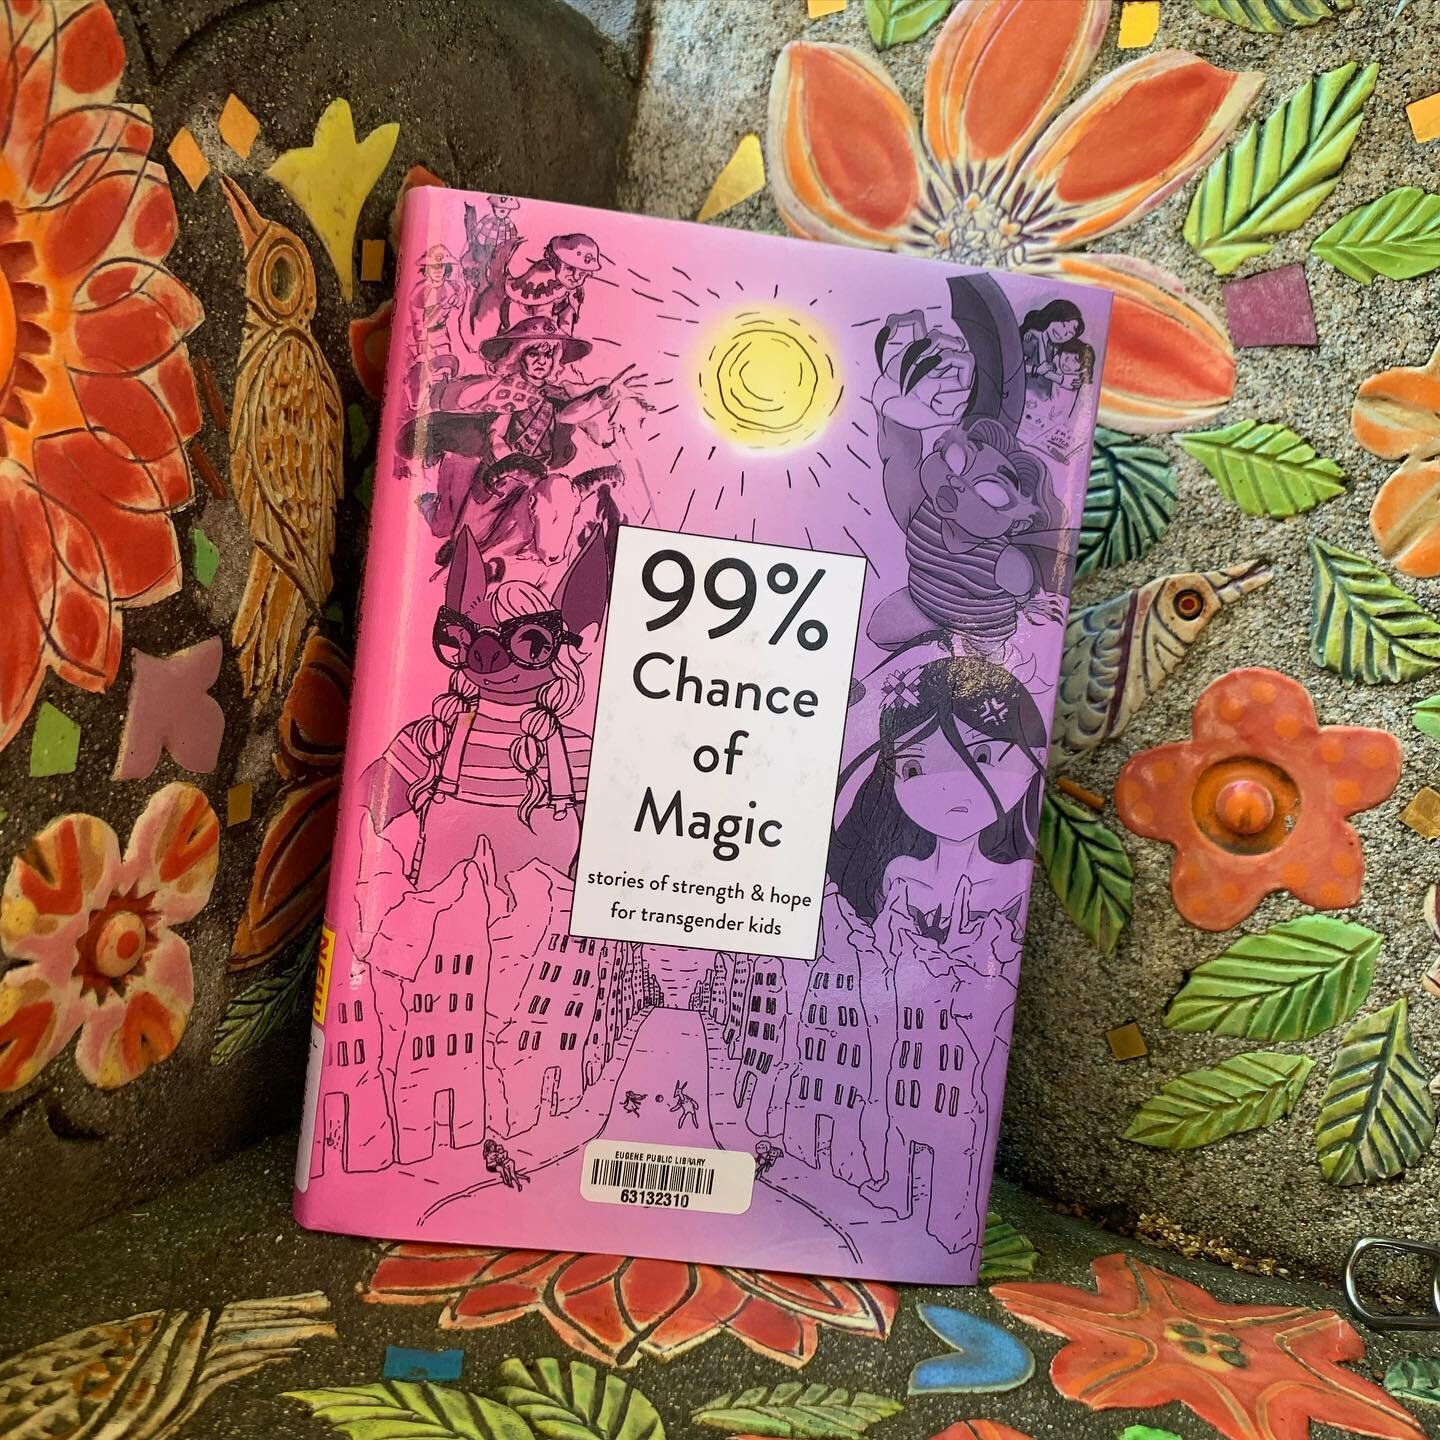 Today&rsquo;s library find! 99% Chance of Magic from Heartspark Press. This books talks about community and hope alongside topics like race and disability. The anthology features works by Misha Lynn Moon, Duna Haller, Clara Mejias, A.K. Blue, Wriply 